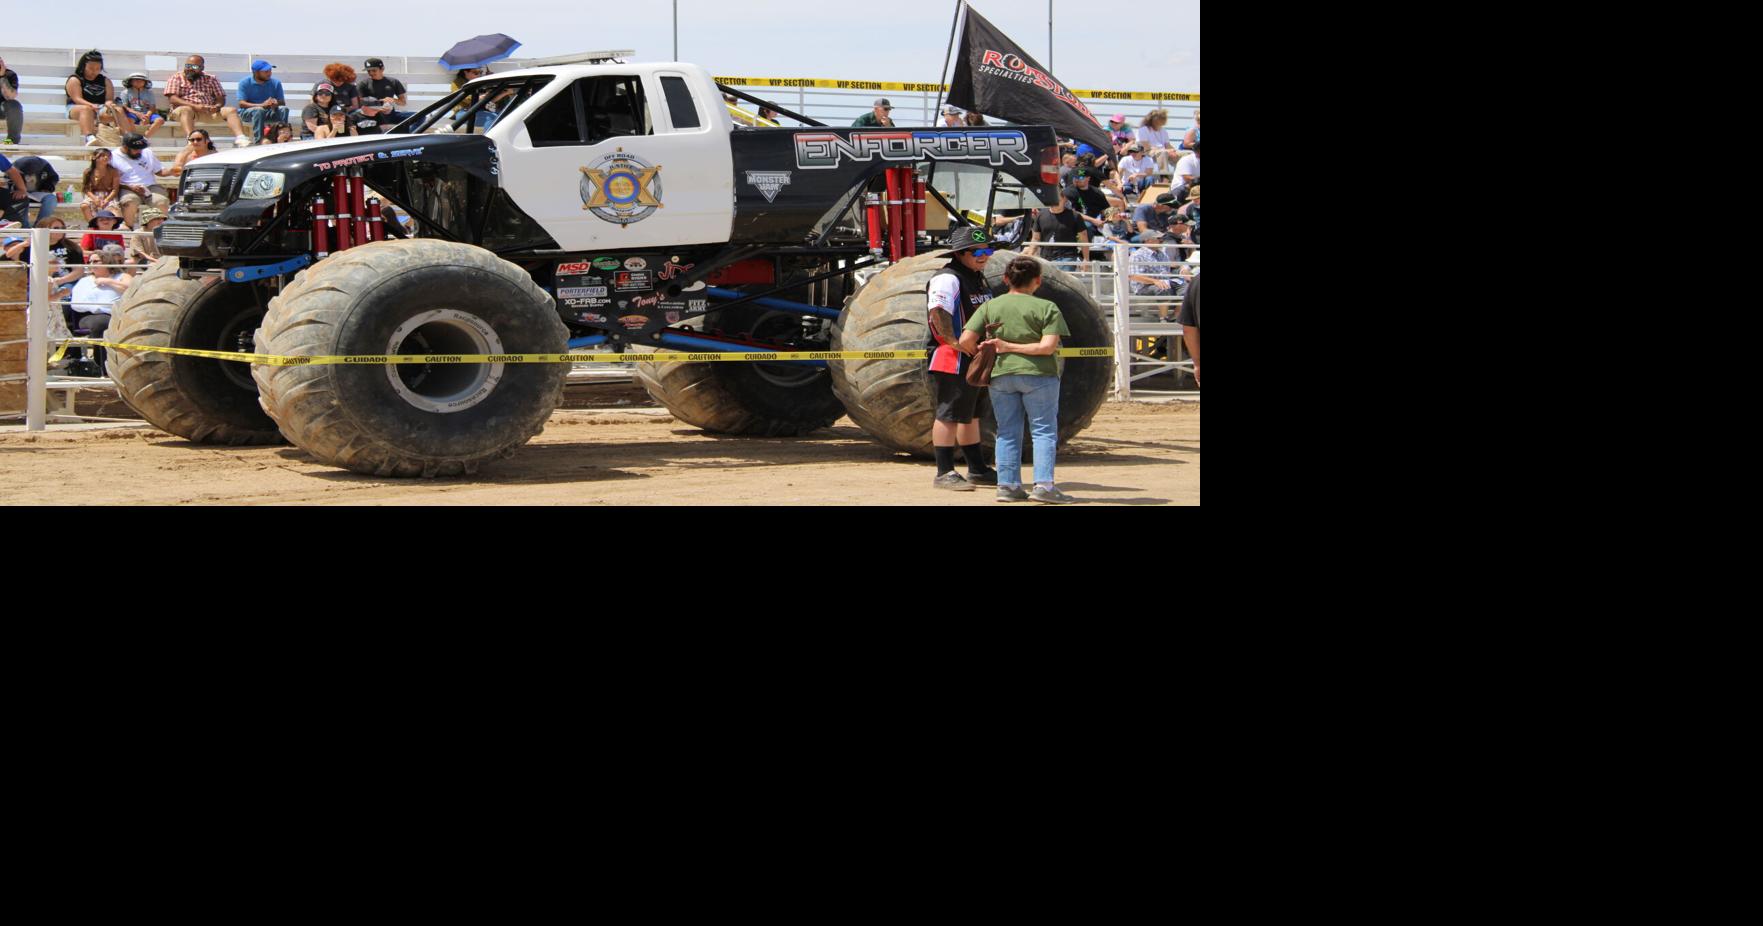 Annual Monster Truck Show comes to Virginia Beach, tickets on sale Friday